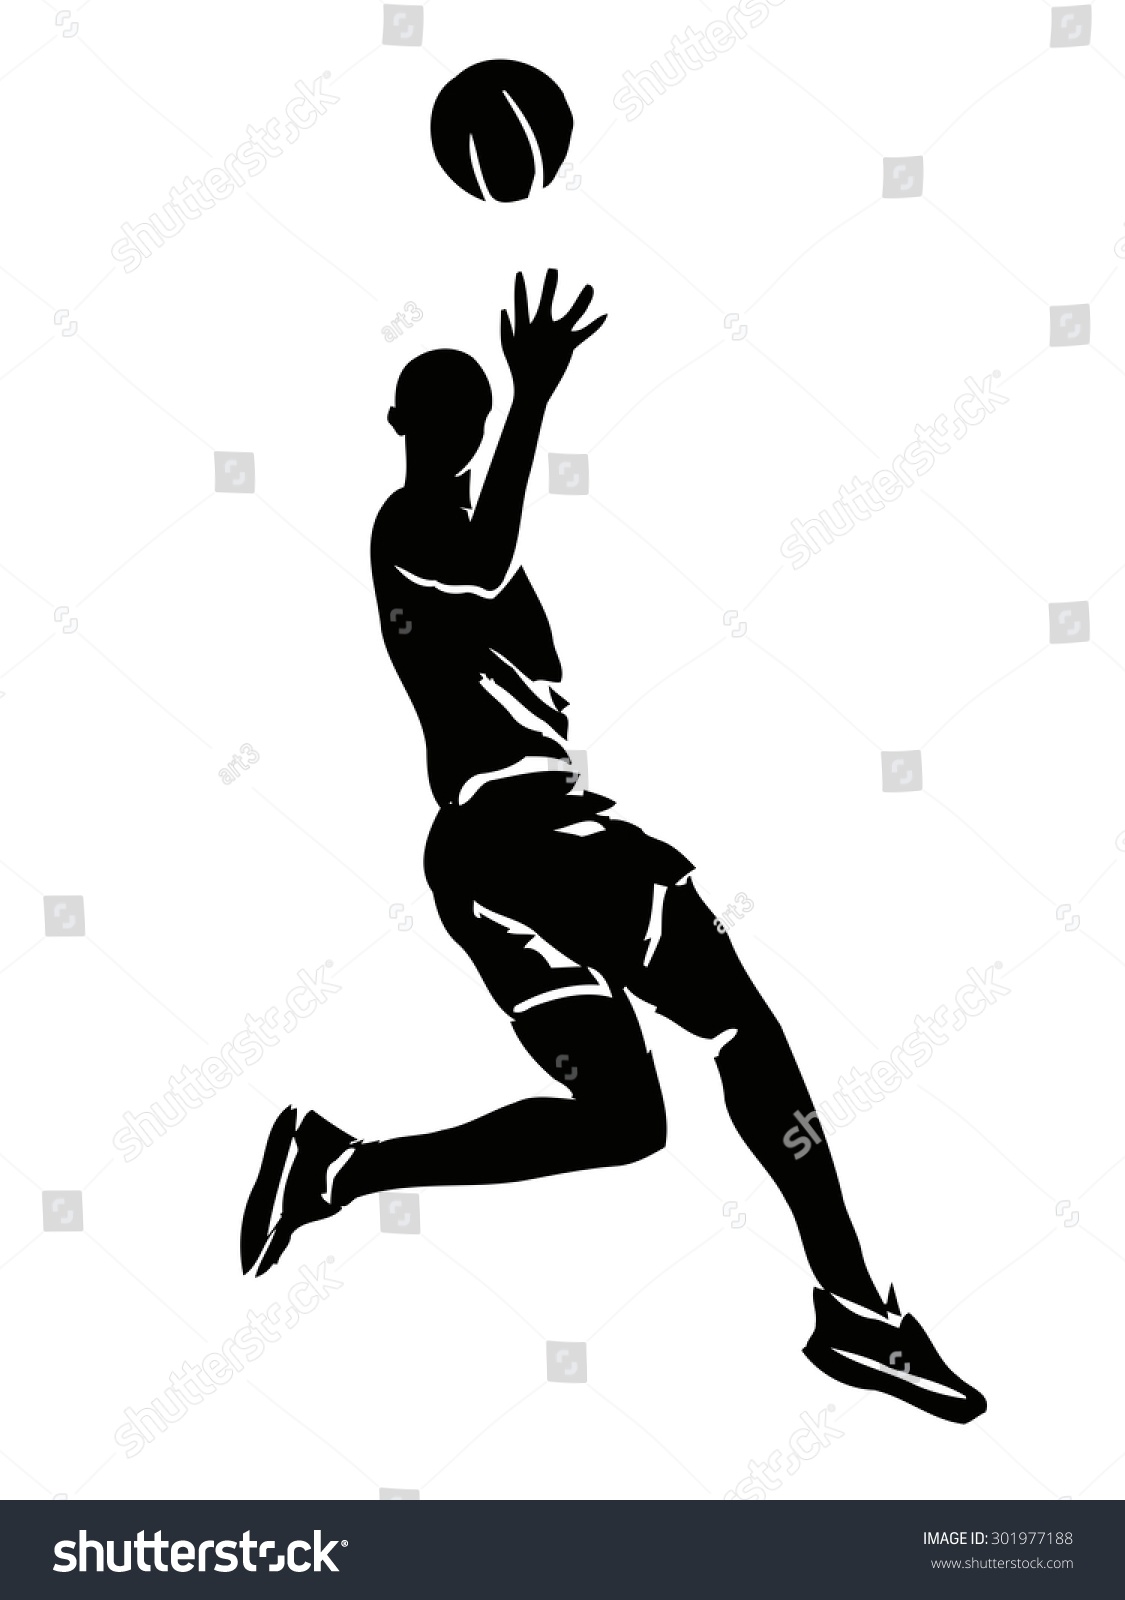 Vector Basketball Player Grunge Sketch On Stock Vector (Royalty Free ...